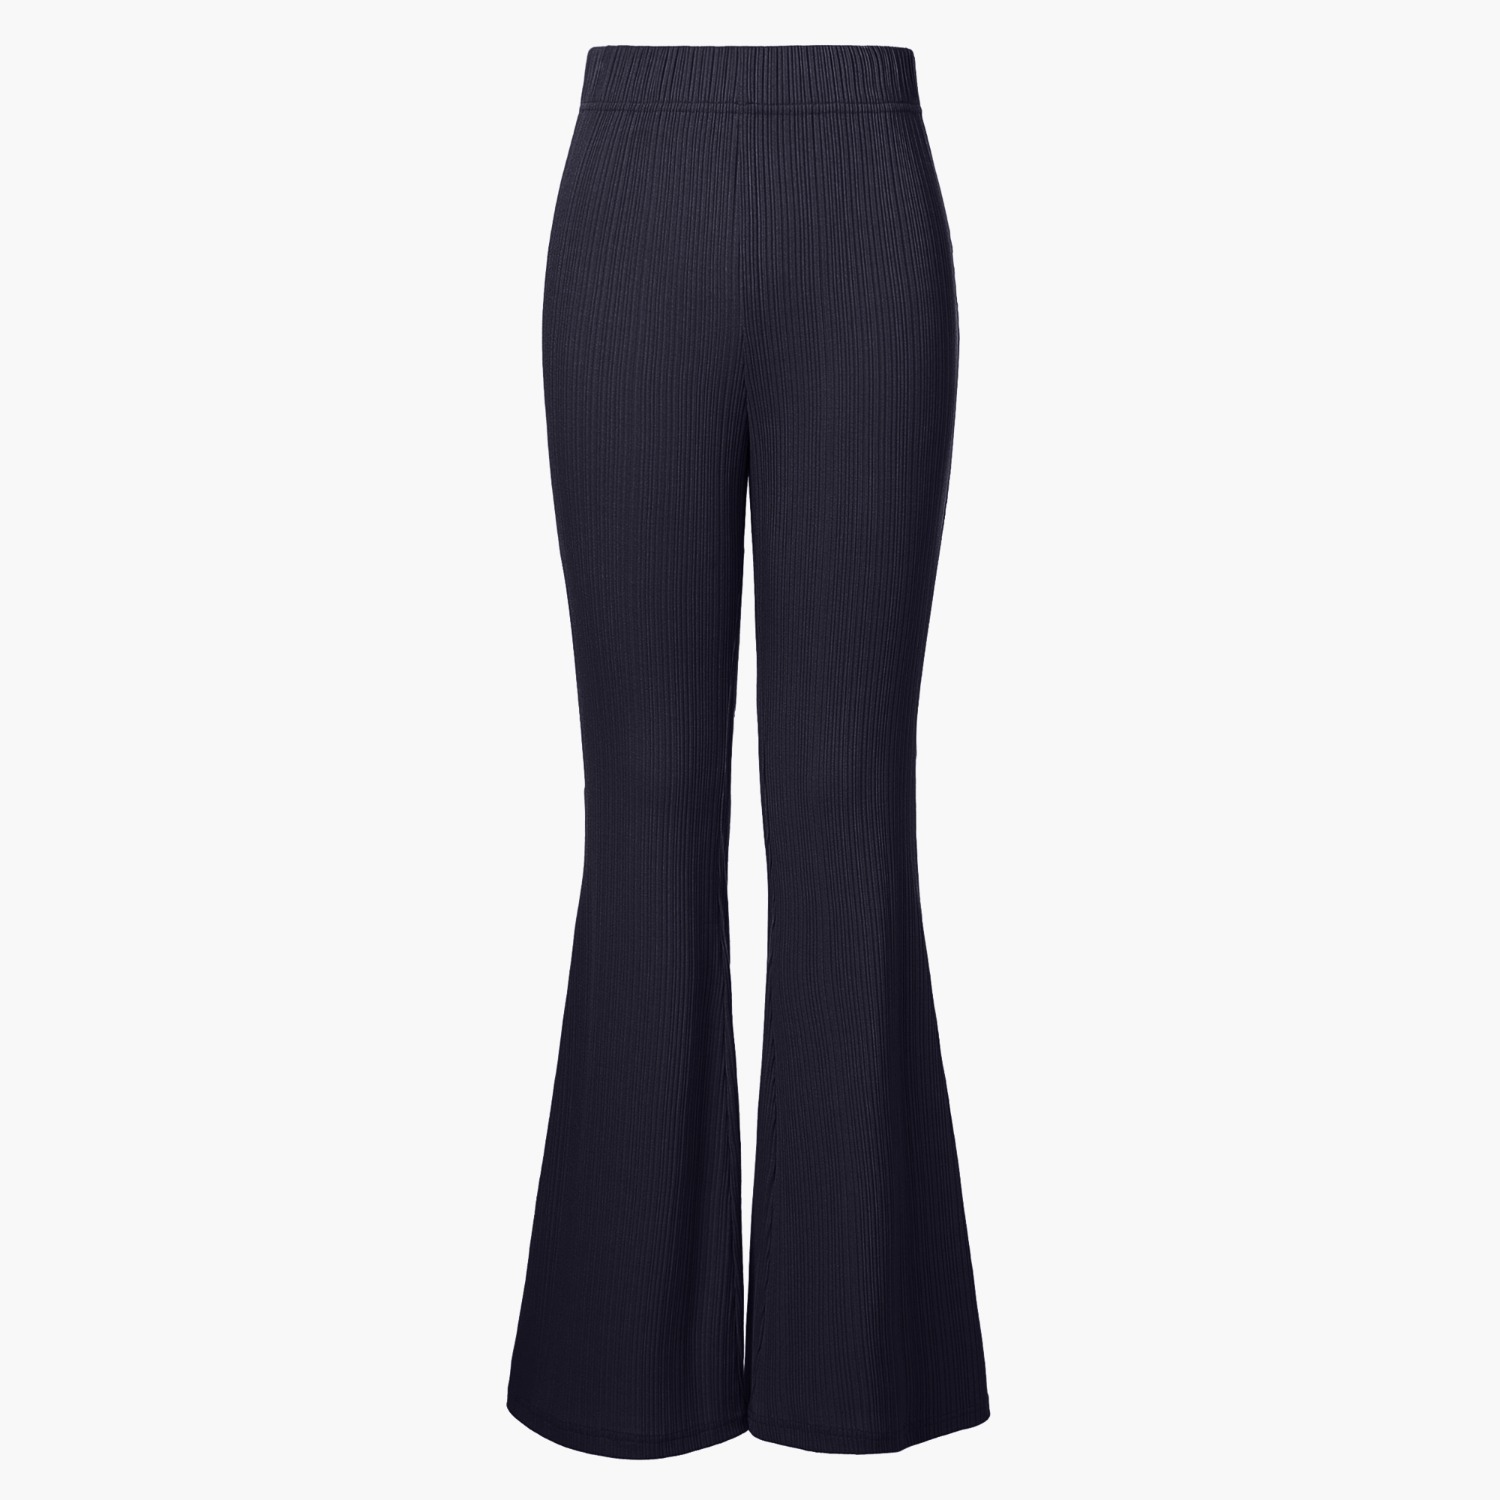 FLARE SOFT TROUSERS, NAVY